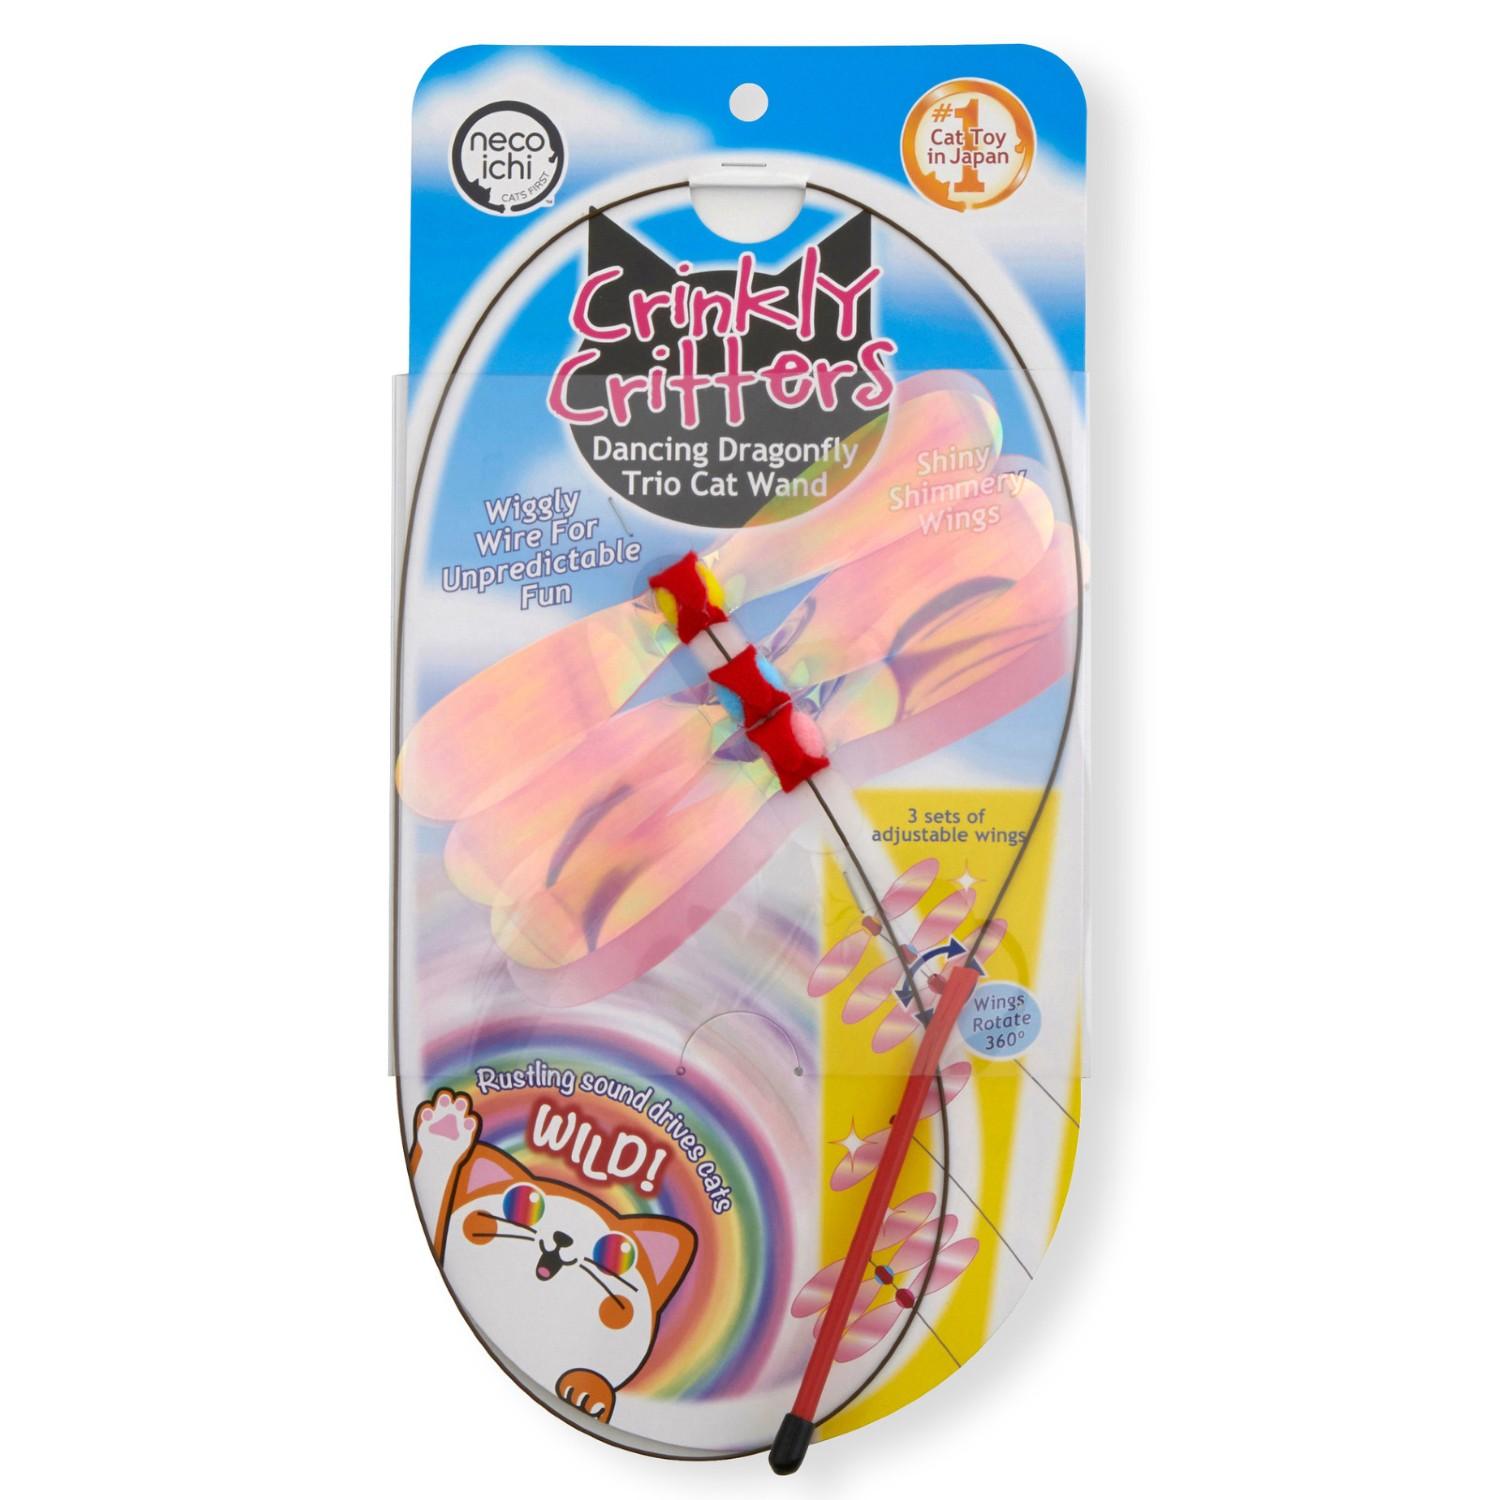 Necoichi Crinkly Critters Adjustable Cat Toy Wand - Dancing Dragonfly Trio